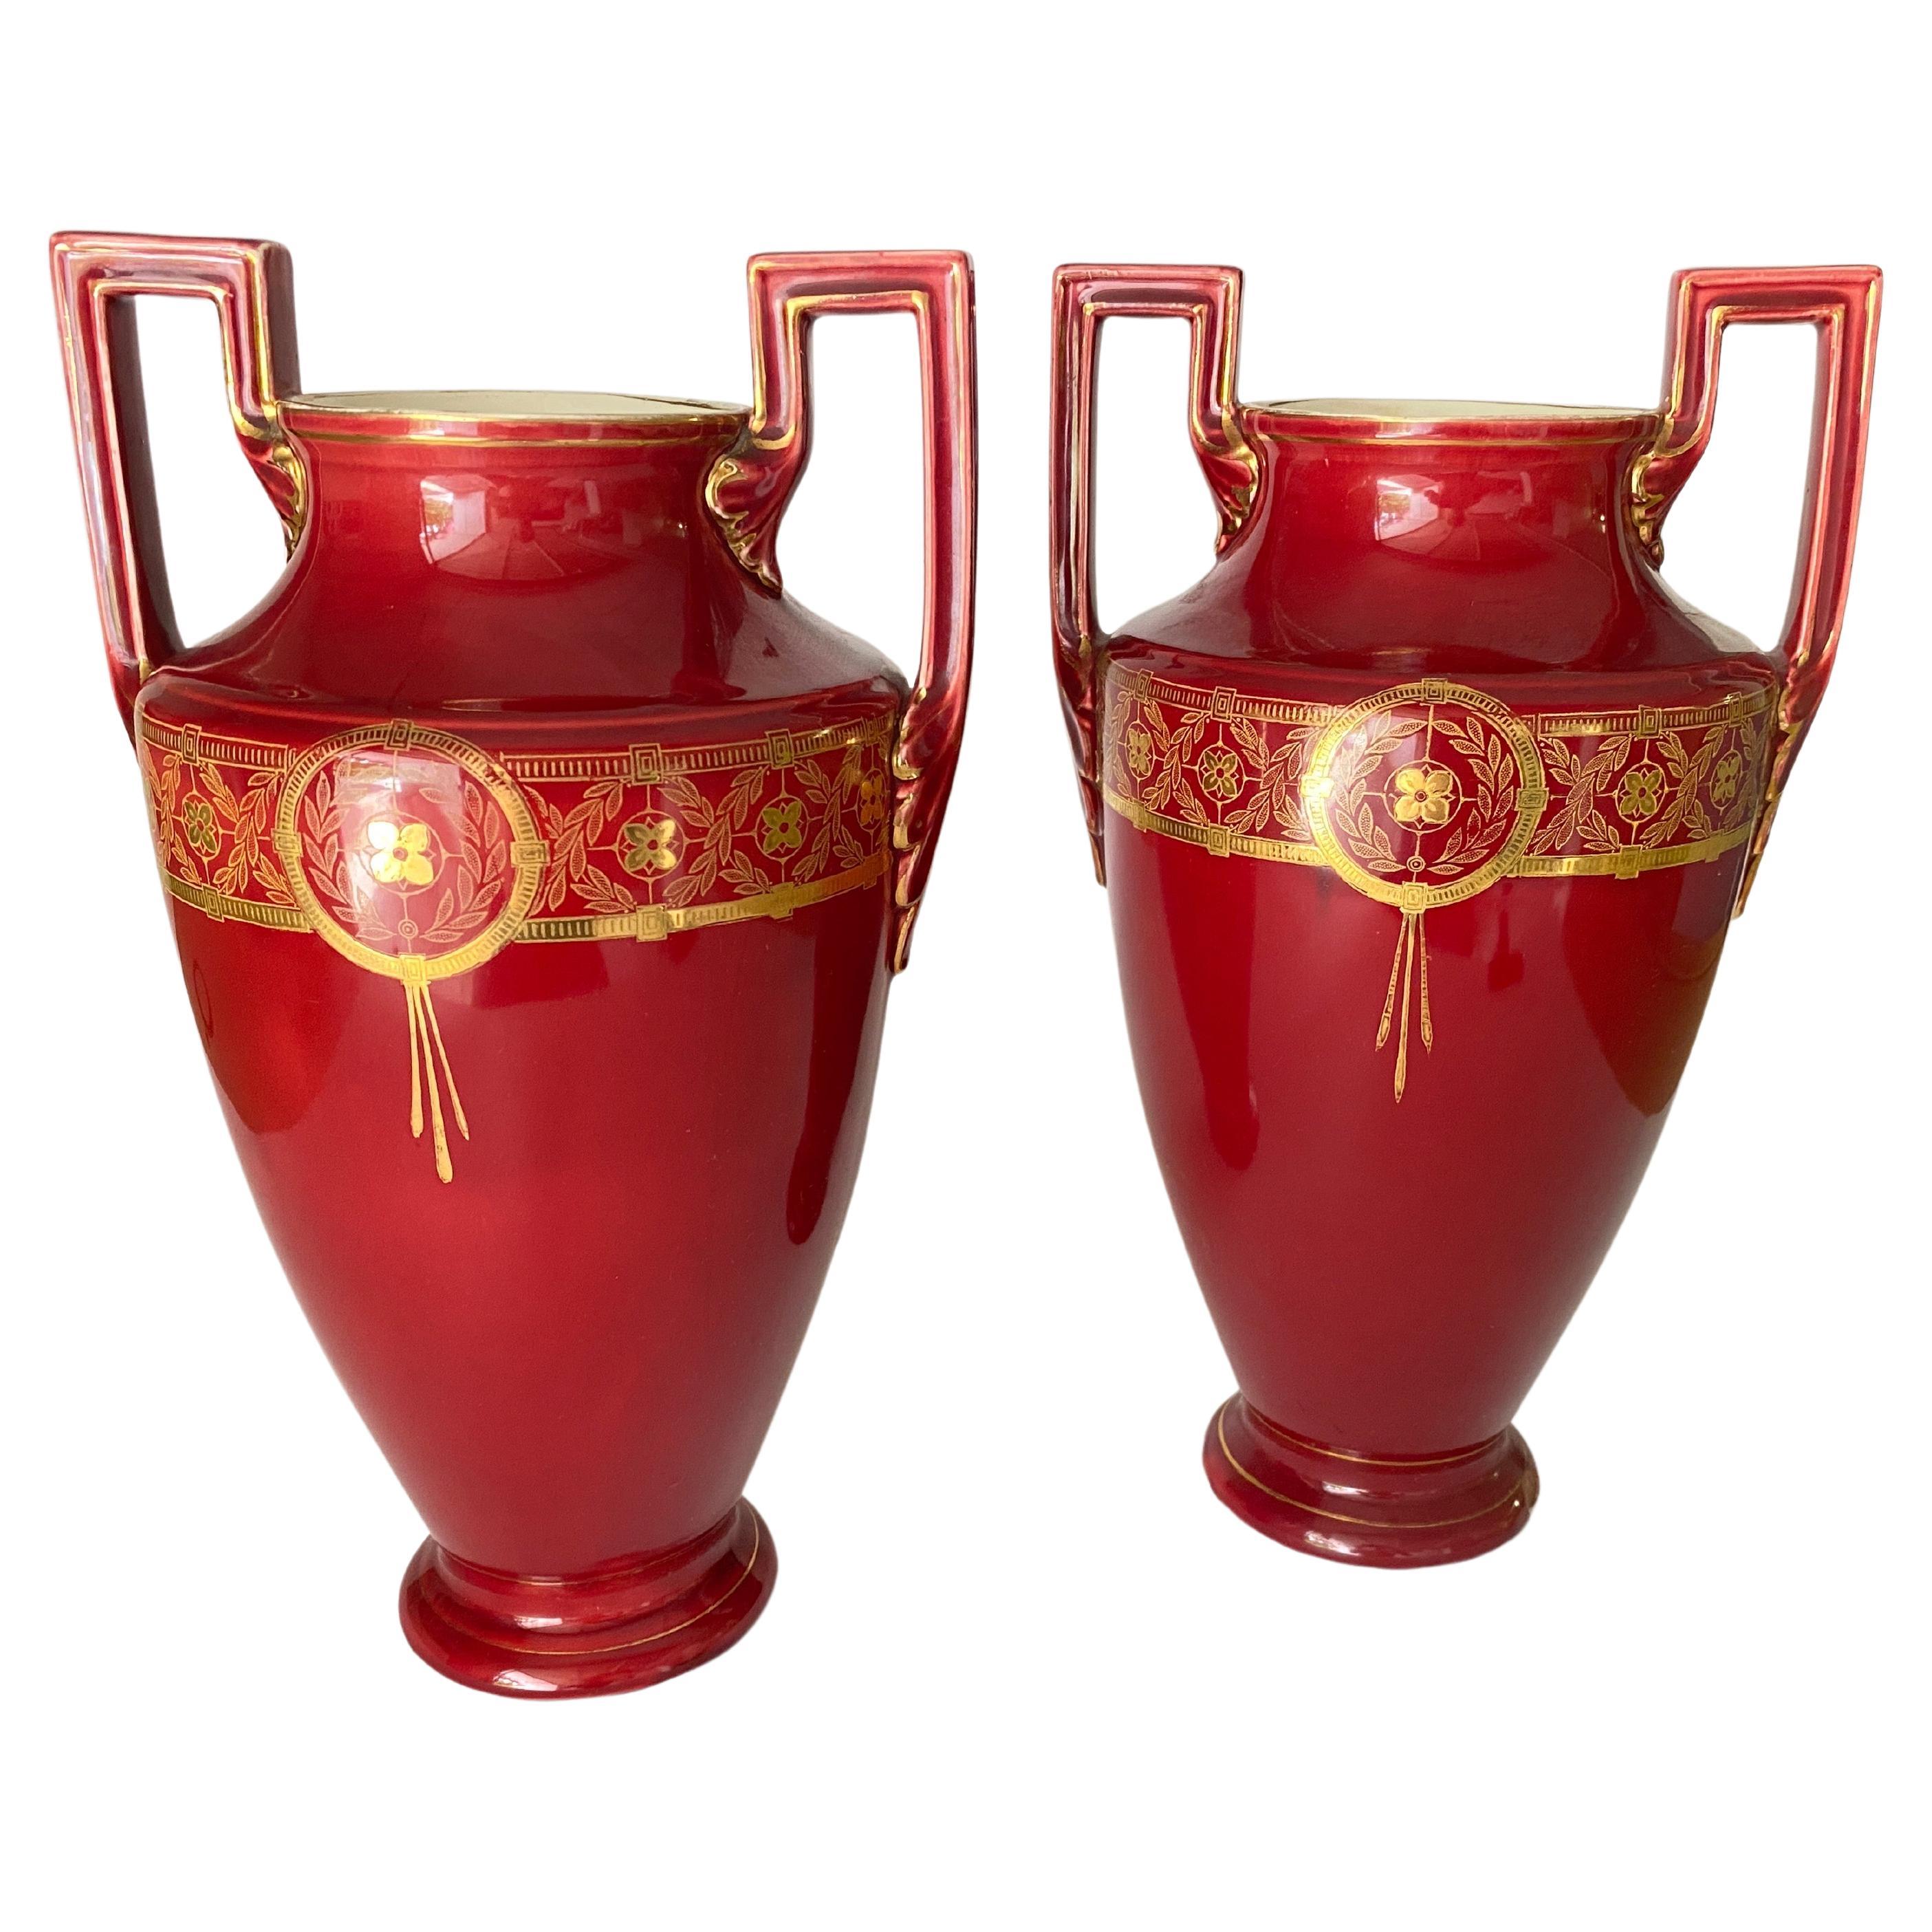 Pair of red cobalt urns Vase with ceramic handles and Gilted decorations